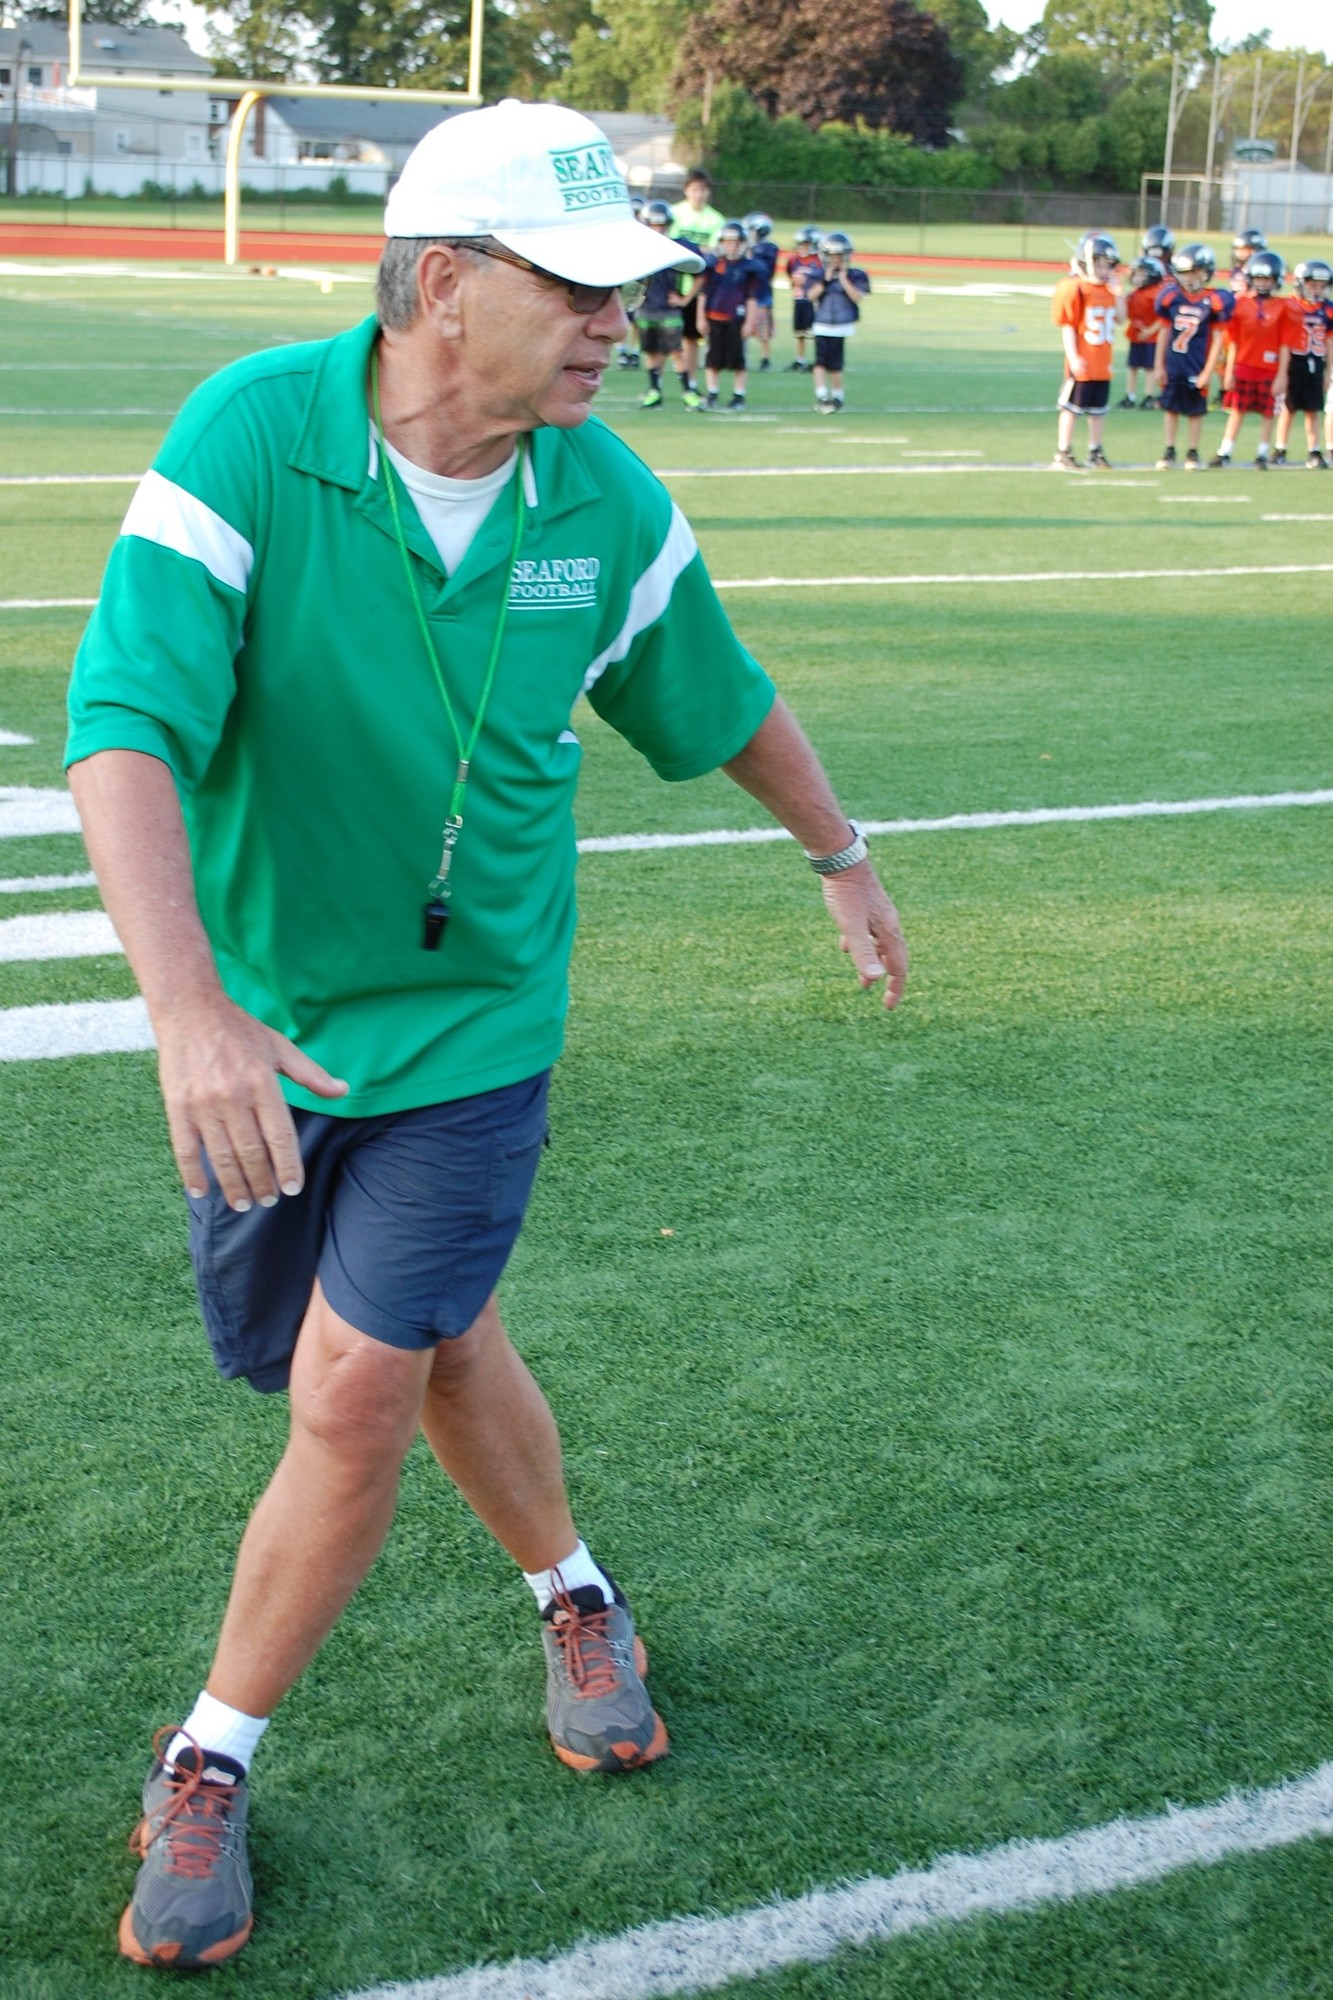 Vikings Head Coach Rob Perpall gave instructions to the Broncos during the two-day football camp at Seaford High School.